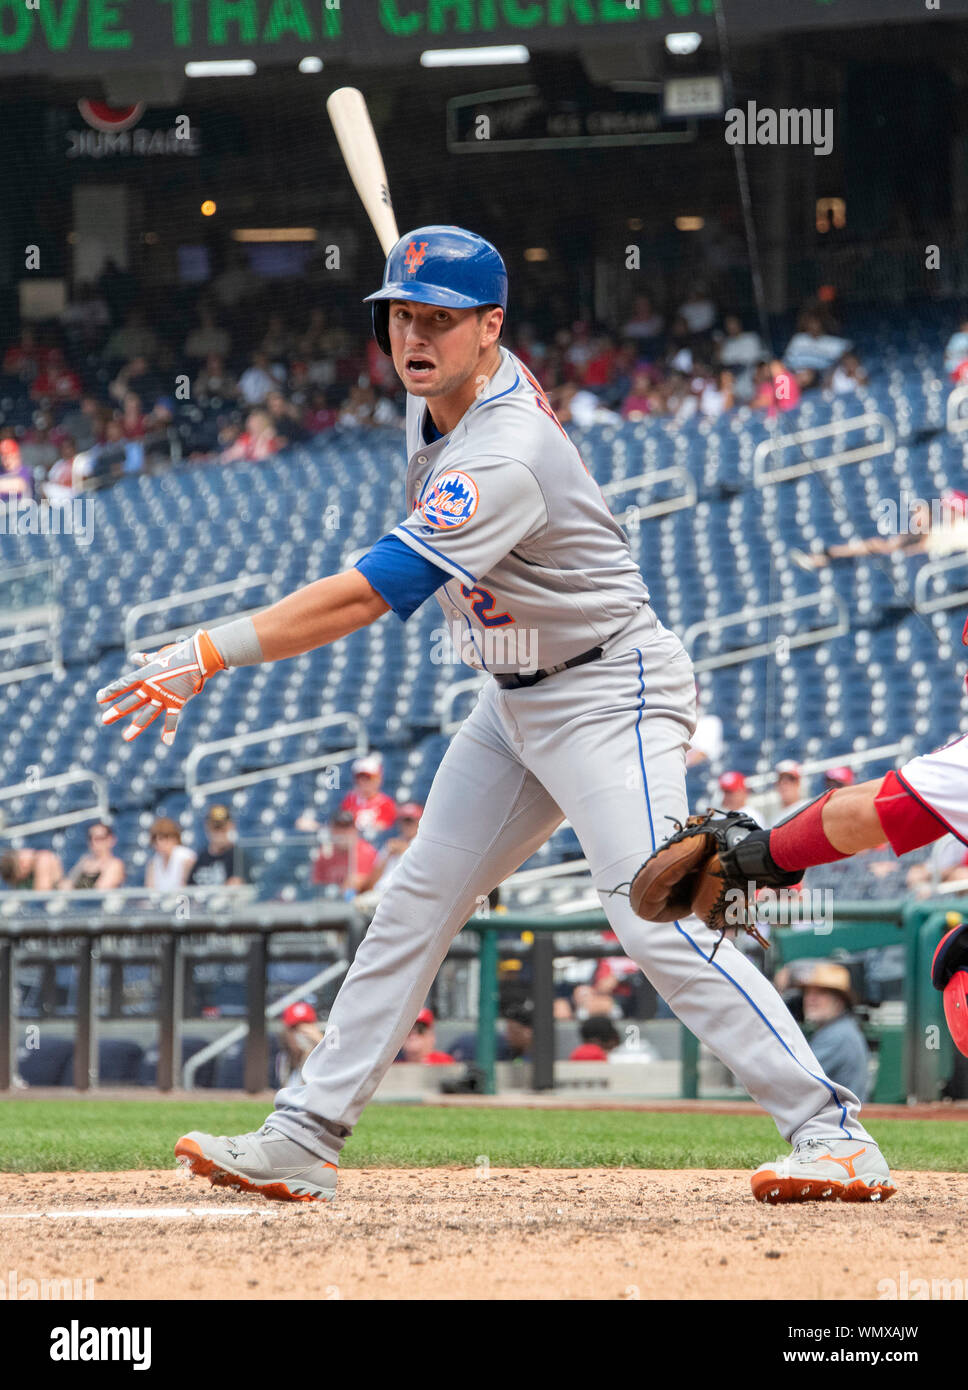 Washington, United States Of America. 04th Sep, 2019. New York Mets second baseman Joe Panik (2) bats in the seventh inning against the Washington Nationals at Nationals Park in Washington, DC on Wednesday, September 4, 2019. The Mets won the game 8 - 4.Credit: Ron Sachs/CNP (RESTRICTION: NO New York or New Jersey Newspapers or newspapers within a 75 mile radius of New York City) | usage worldwide Credit: dpa/Alamy Live News Stock Photo